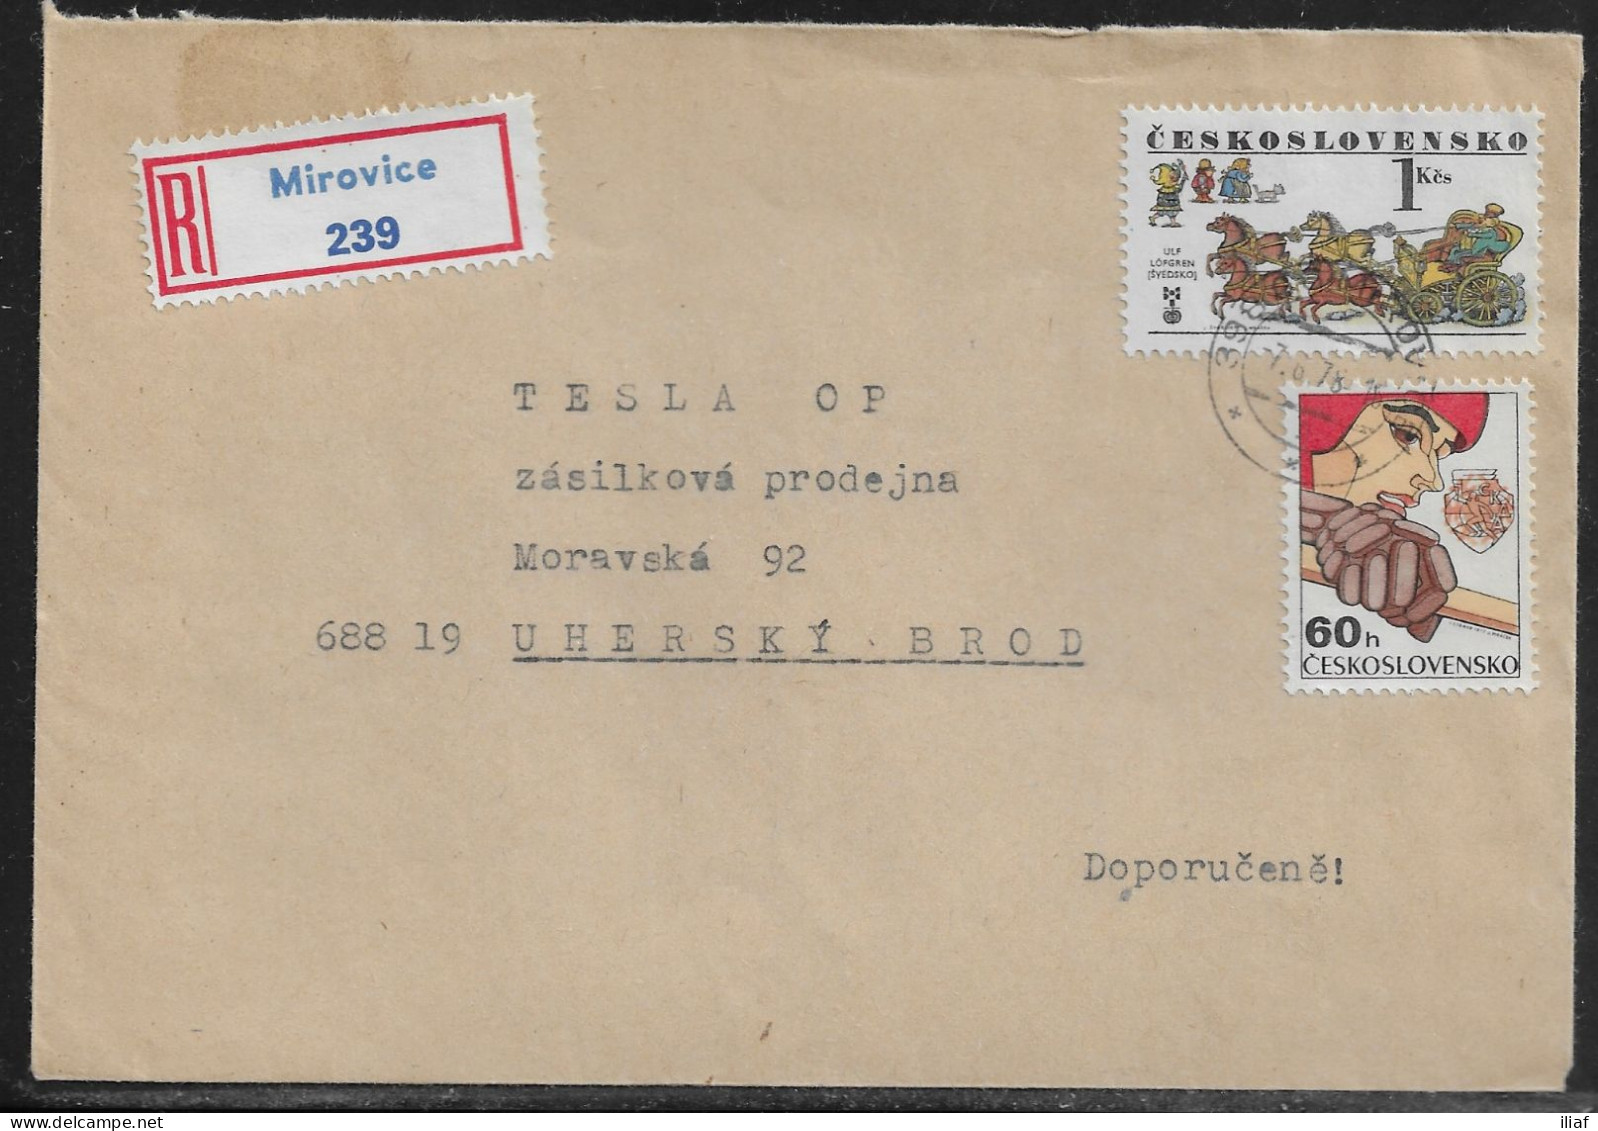 Czechoslovakia. Stamps Sc. 2095, 1735 On Registered Letter, Sent From Mirovice 7.08.78 For “Tesla” Uhersky Brod. - Cartas & Documentos